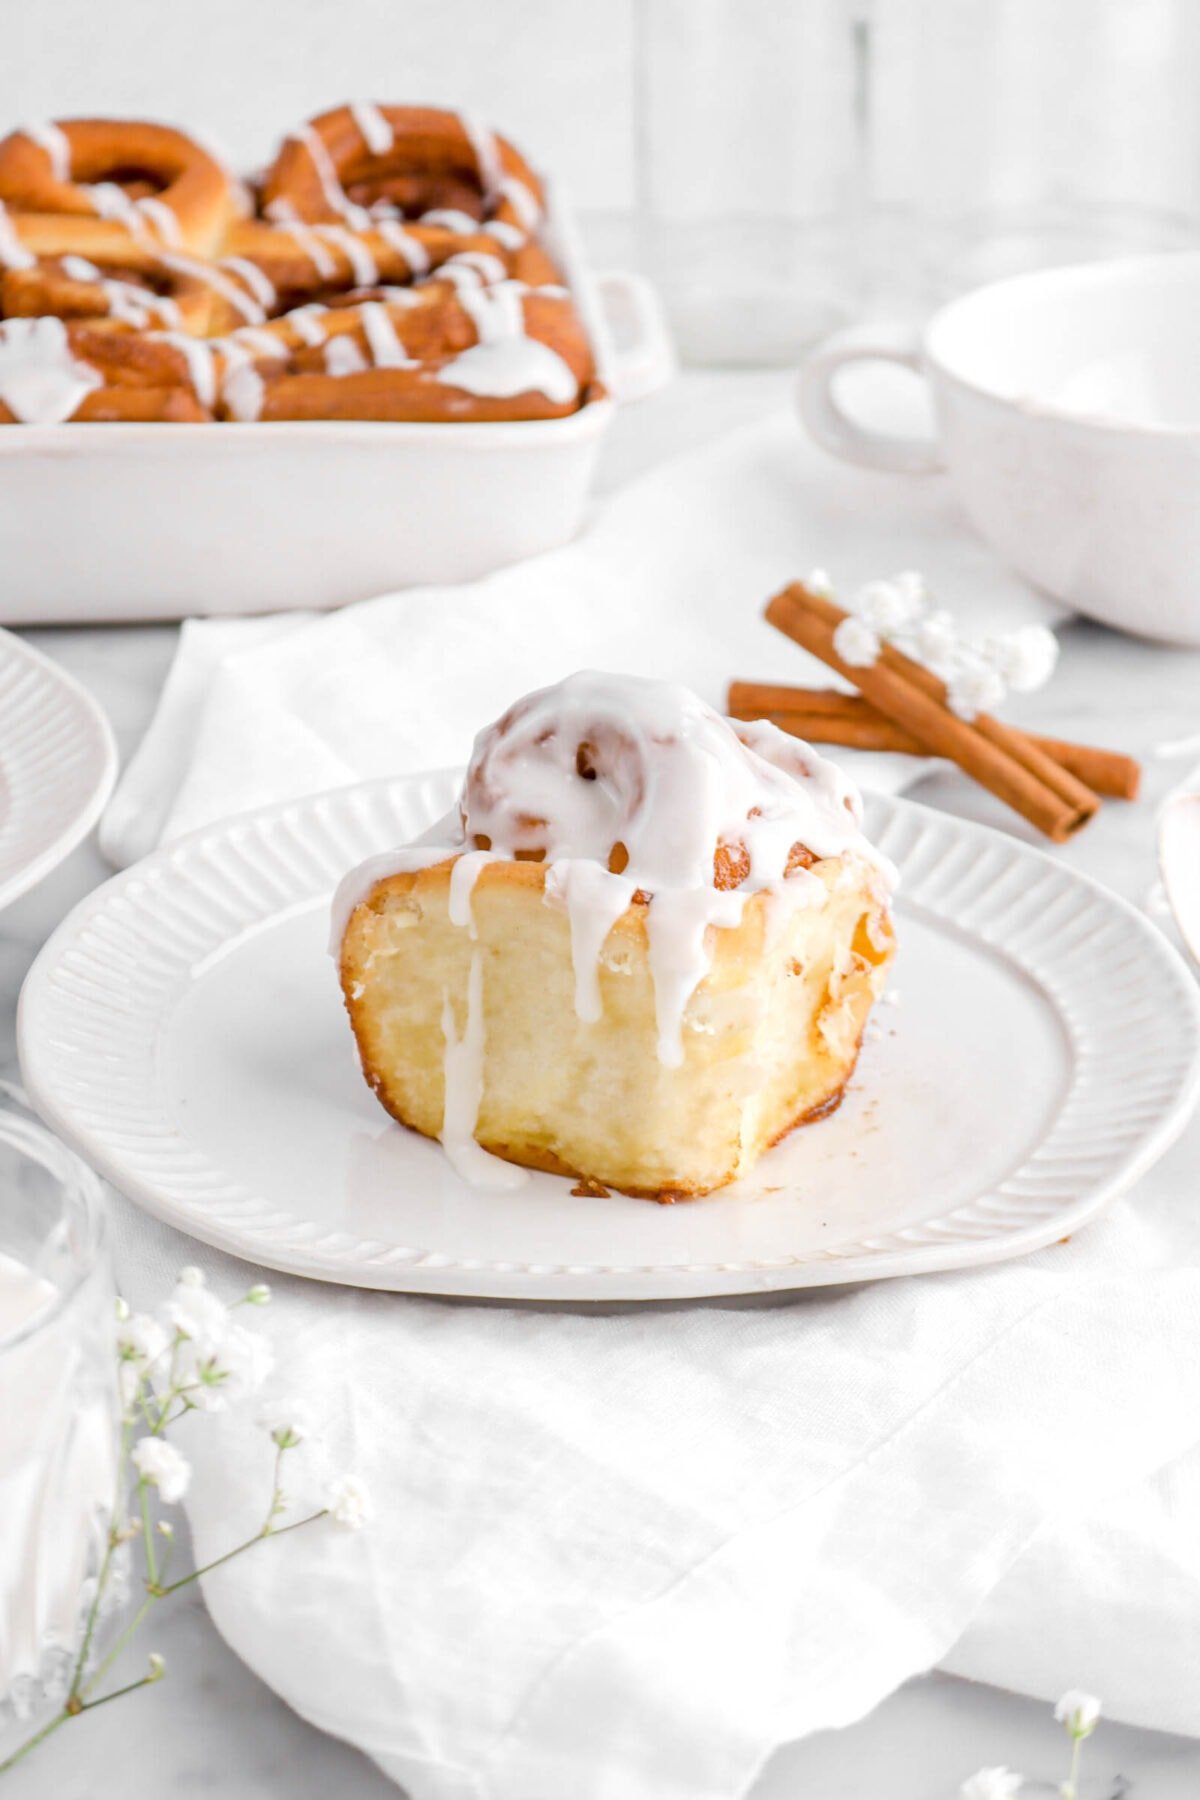 iced cinnamon roll on white plate with two cinnamon sticks behind, a white mug, and casserole of cinnamon rolls.